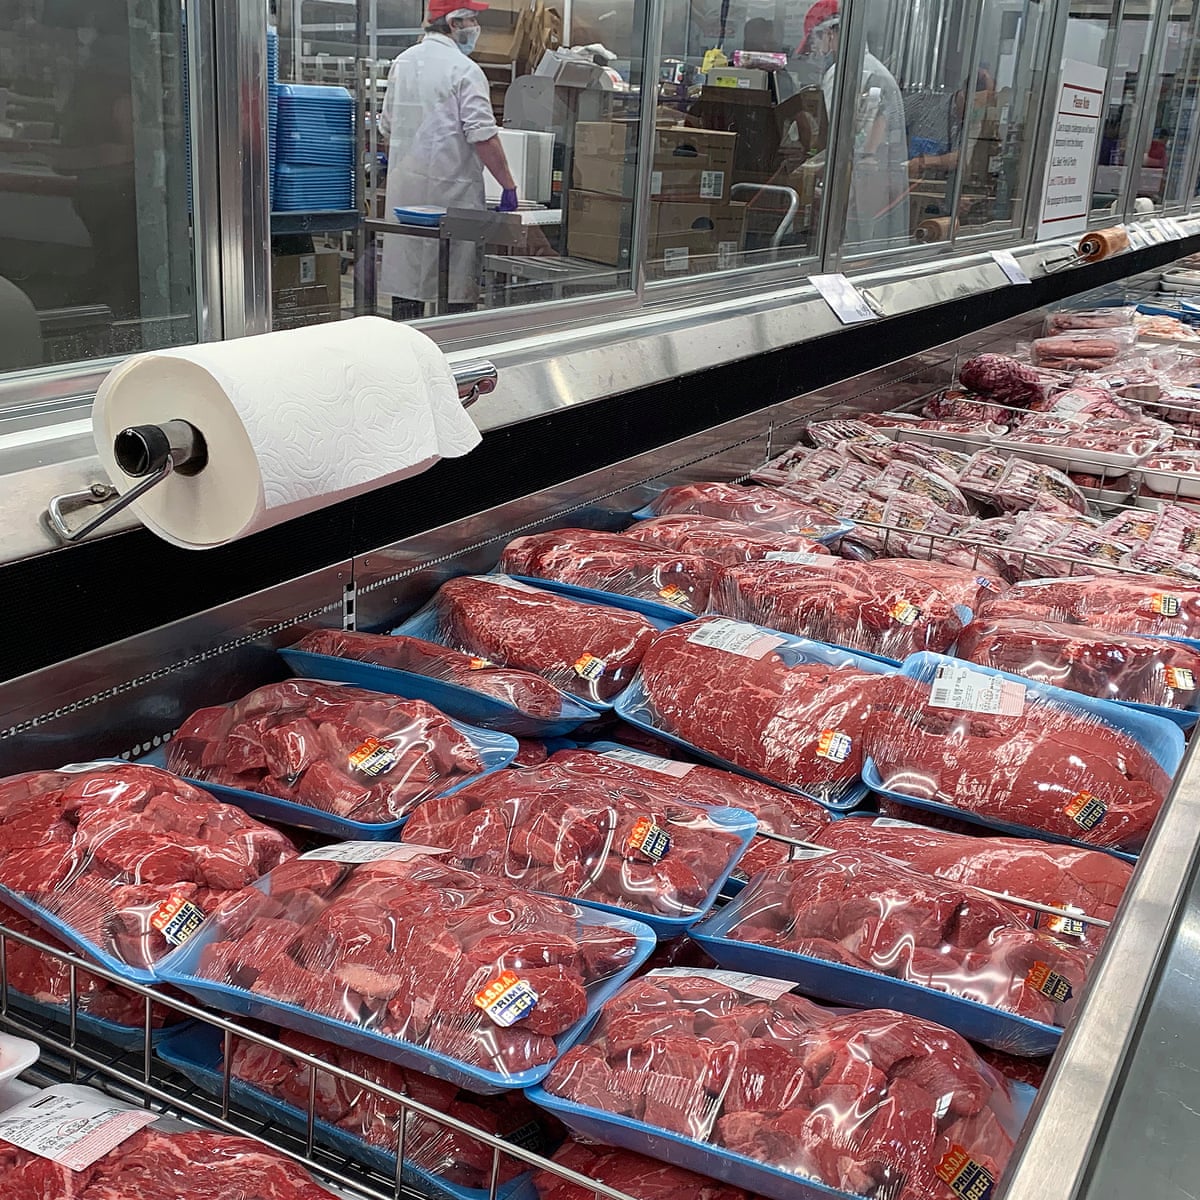 The Chinese city of Wuhan said on Friday, November 13th, it had detected the novel coronavirus on the packaging of a batch of Brazilian beef, as it ramped up testing of frozen foods this week as part of a nationwide campaign.